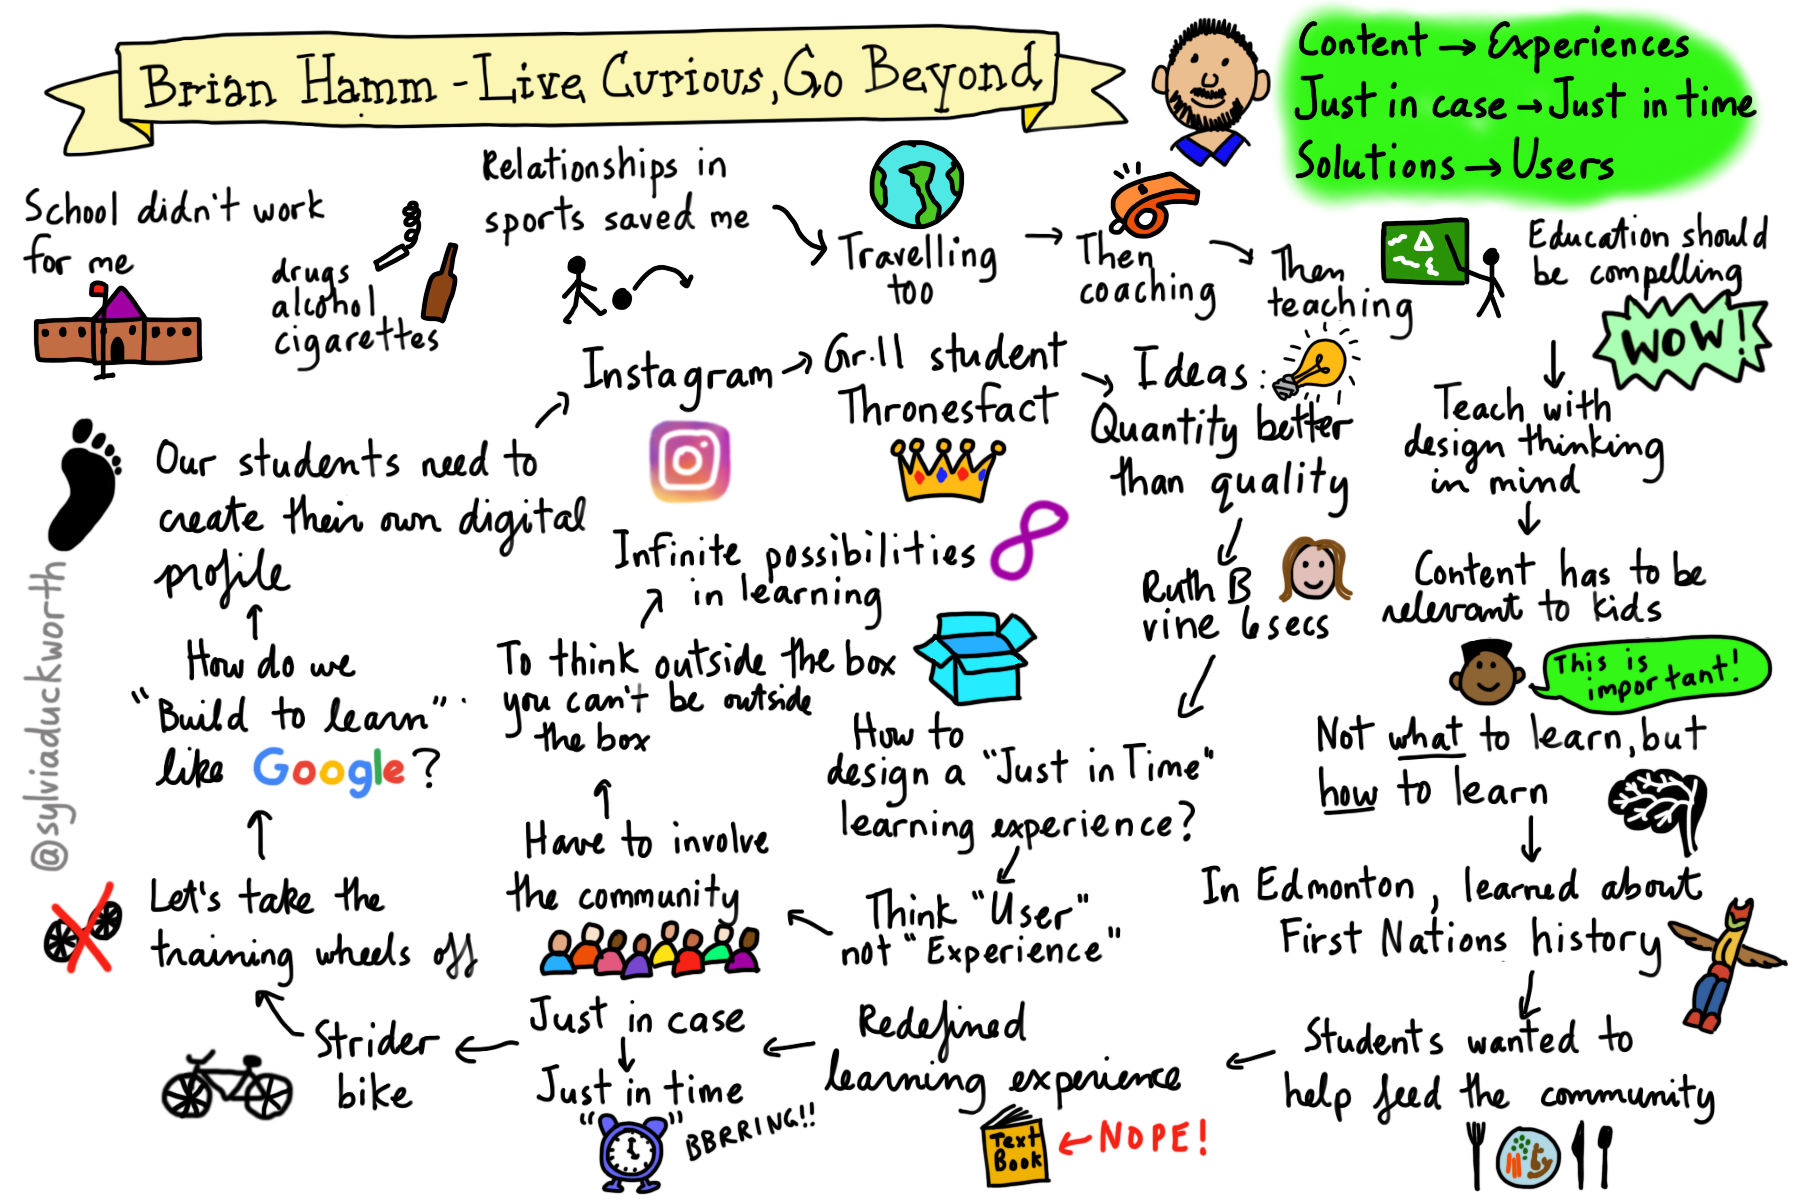 Brian Hamm Live Curious Go Beyond Sketchnote by Sylvia Duckworth.png